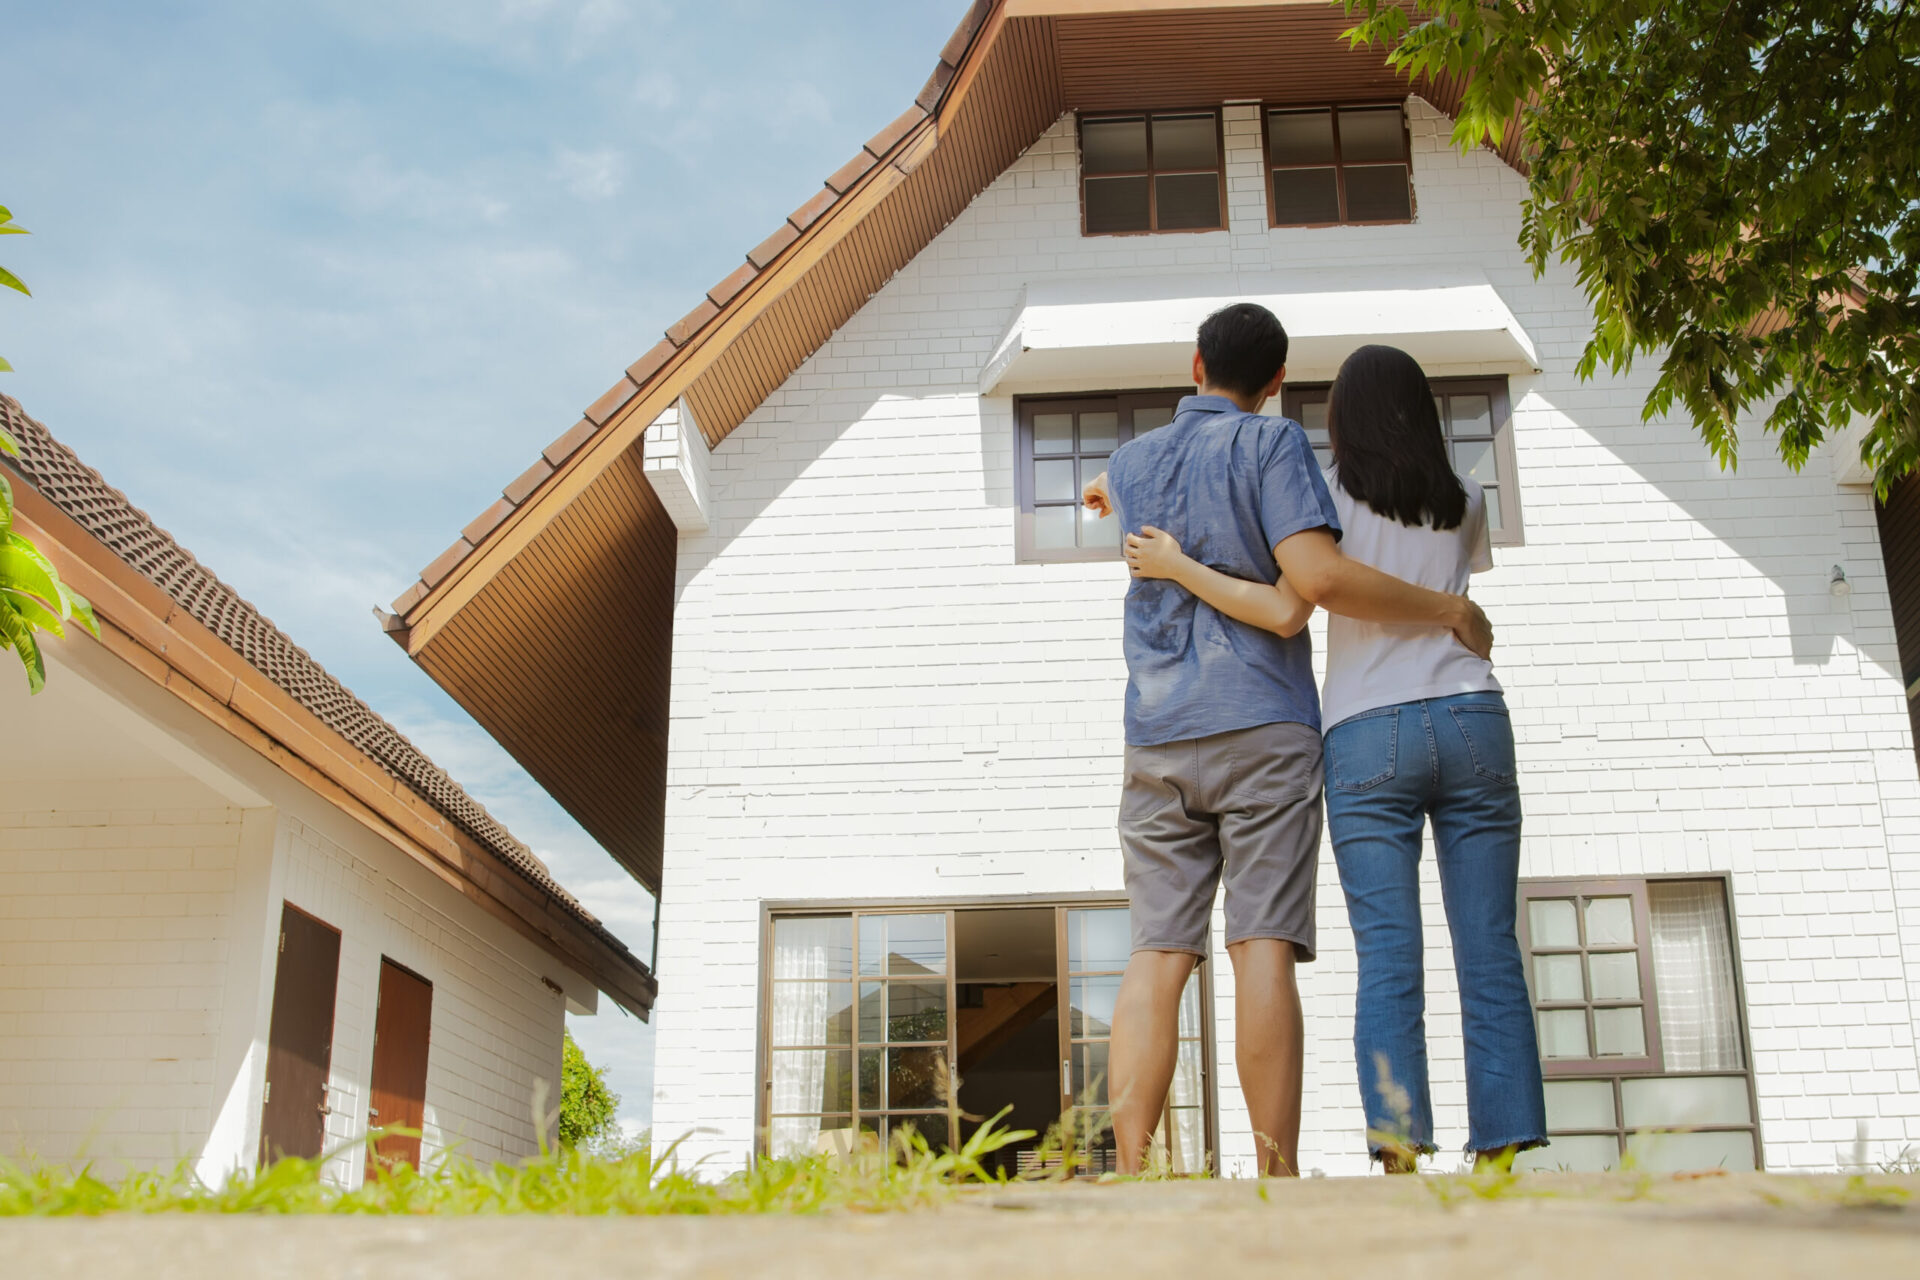 Is America’s Obsession With Homeownership A Good Thing?